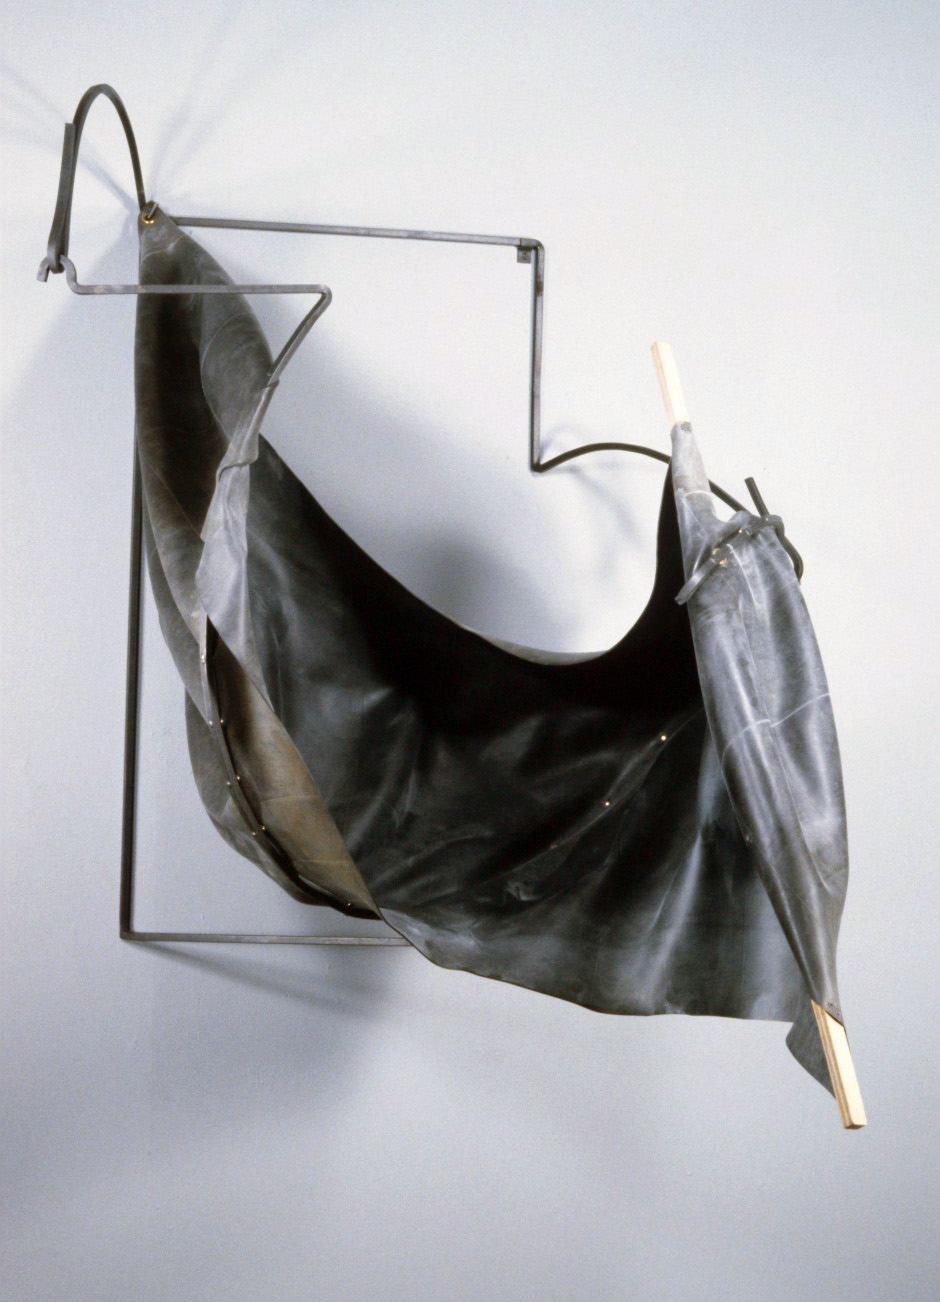   Untitled 90.4   1990  rubber and steel  62 X 49 X 53"   